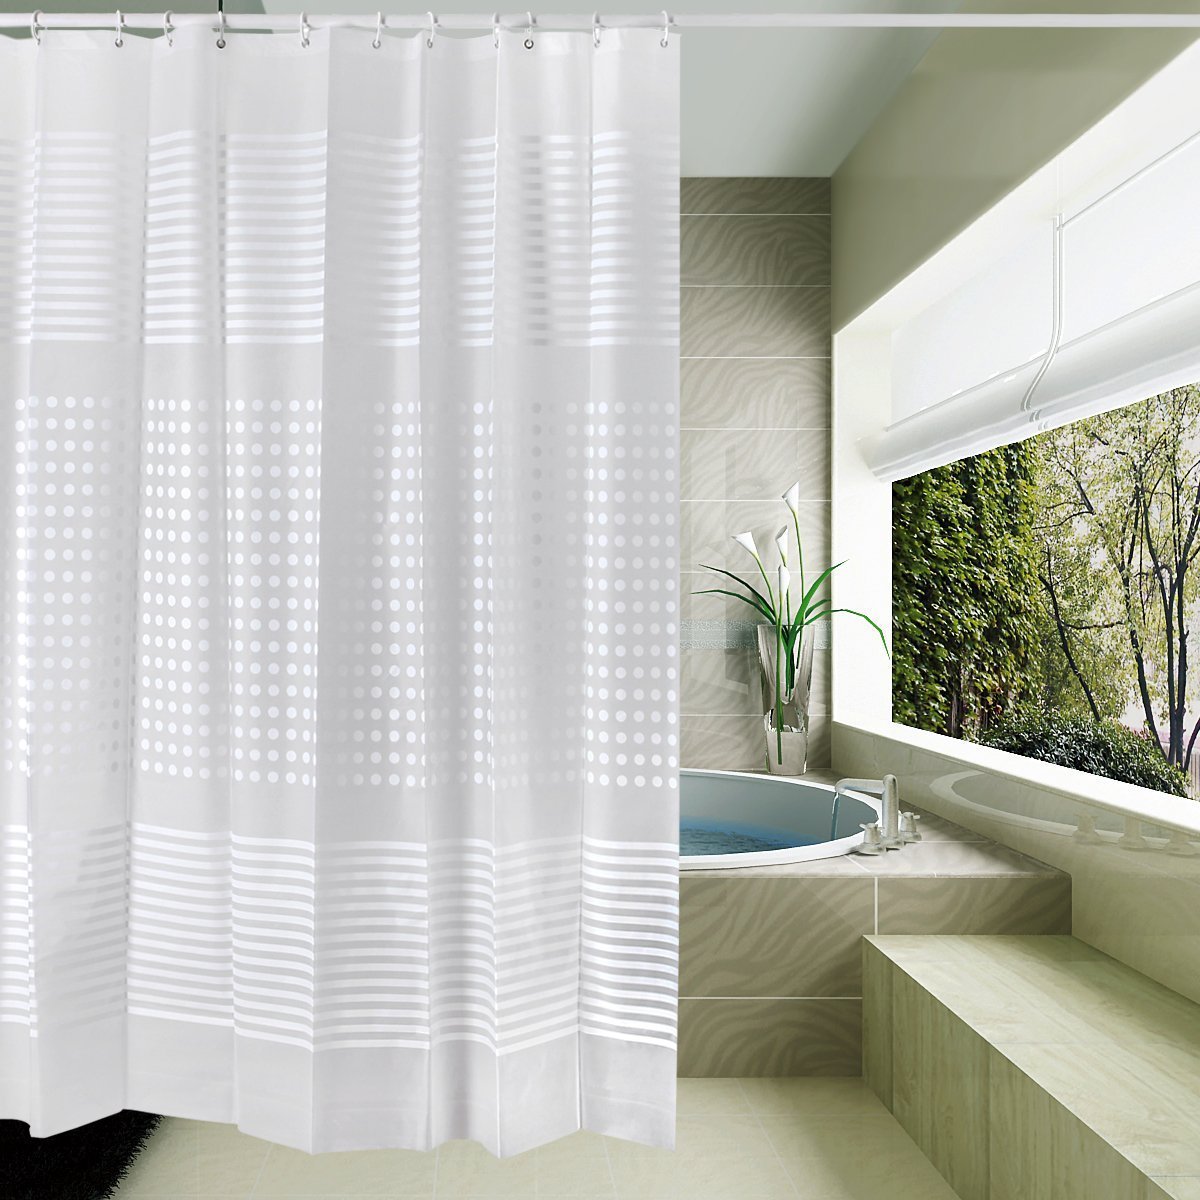 non-toxic shower curtain